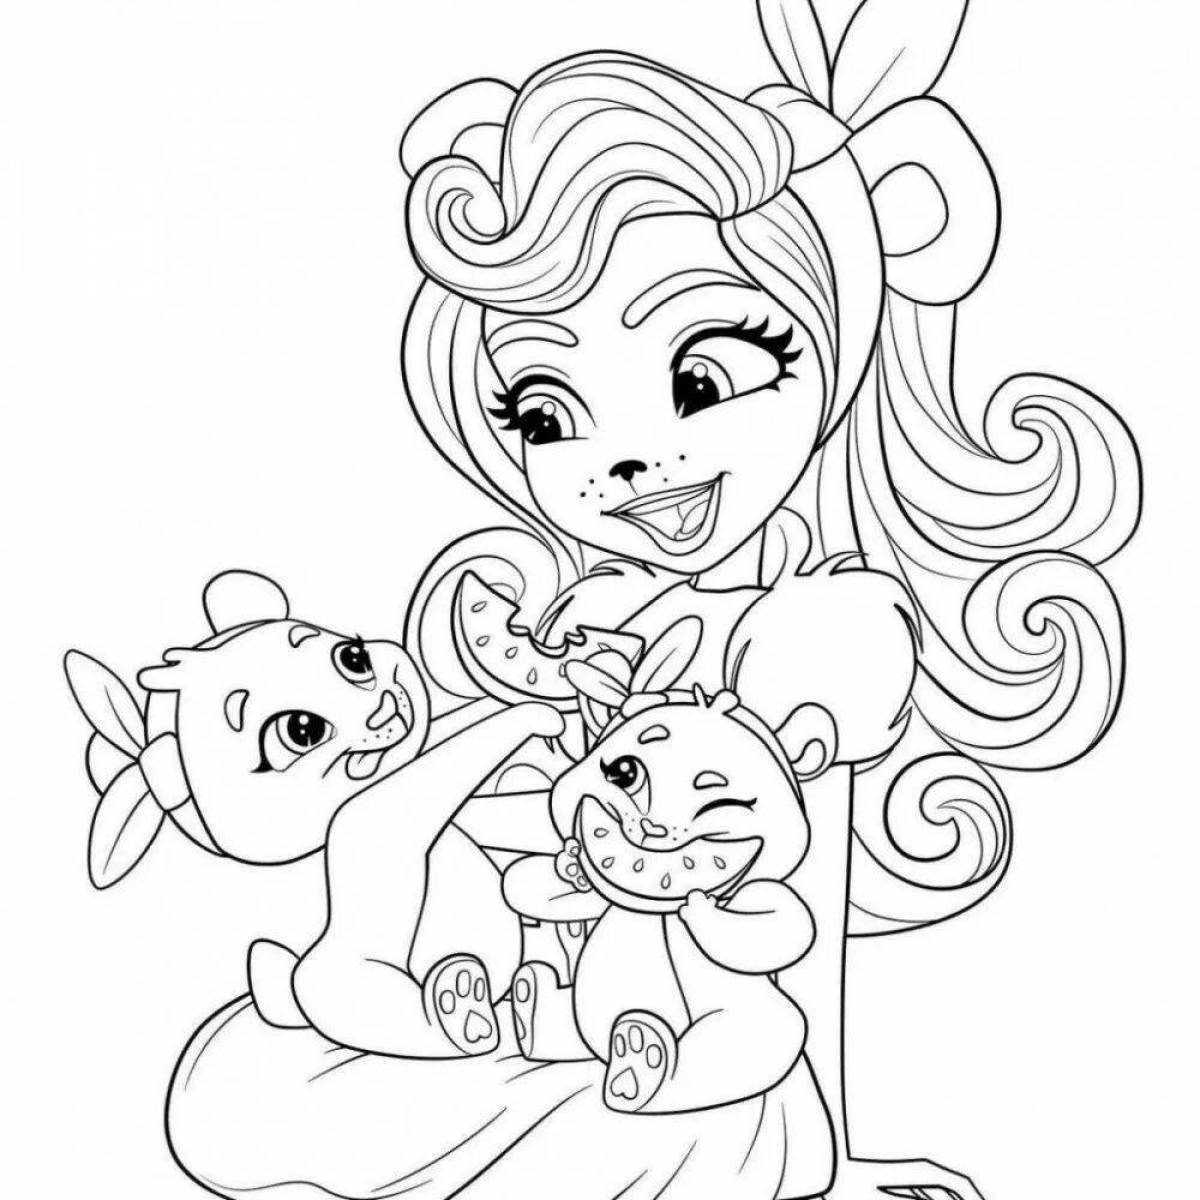 Adorable mermaid coloring pages